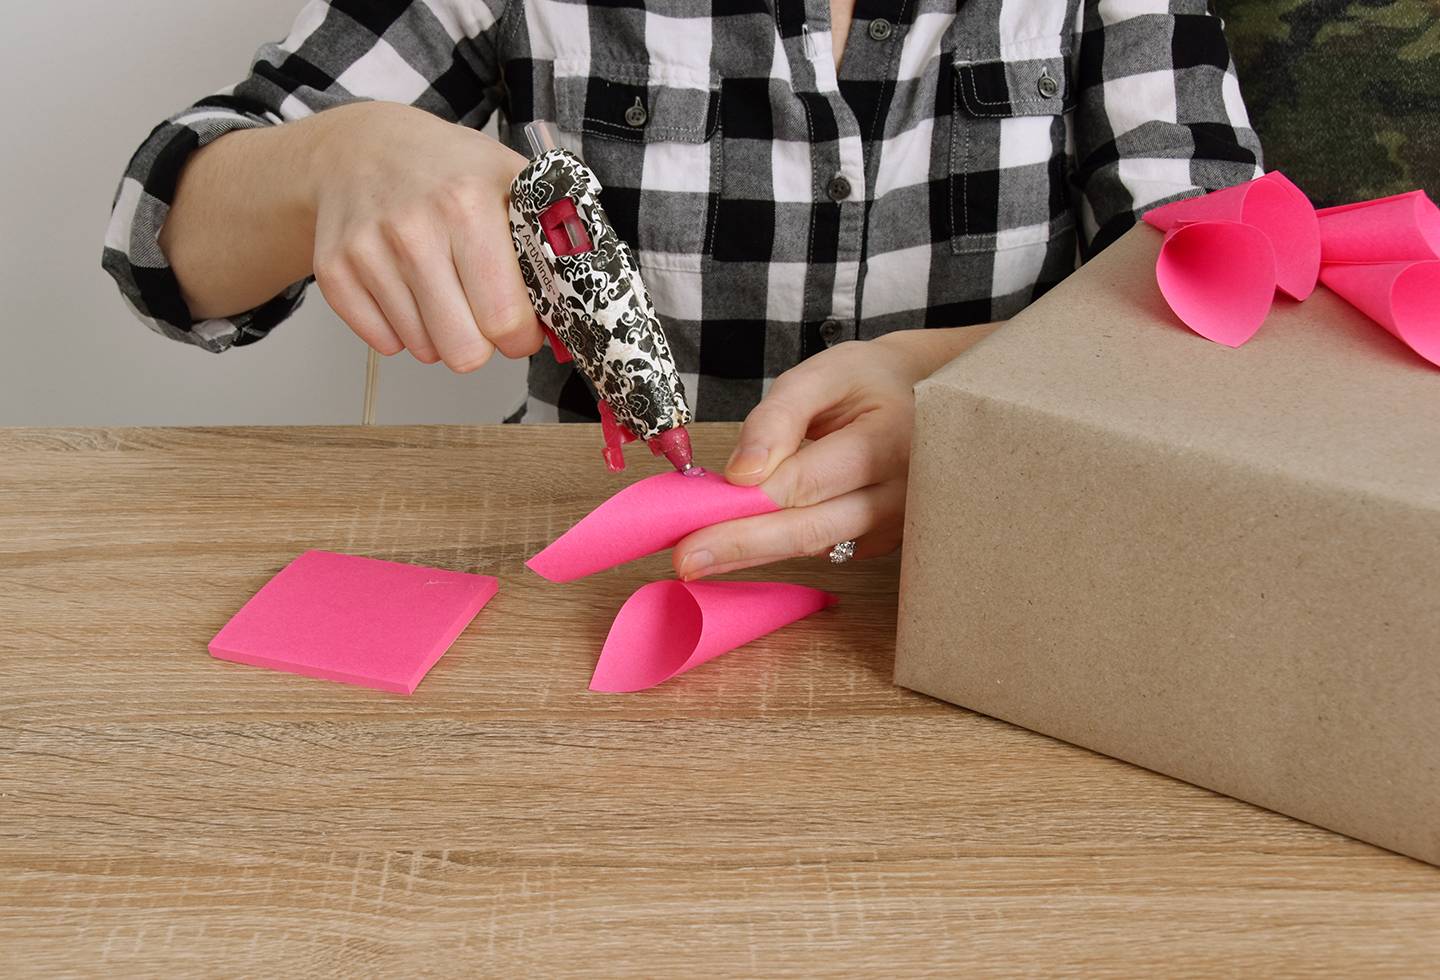 5 Ways To Wrap Gifts Using Office Supplies | For Curbly by Faith Towers Provencher #creative #gift #wrapping #holiday 